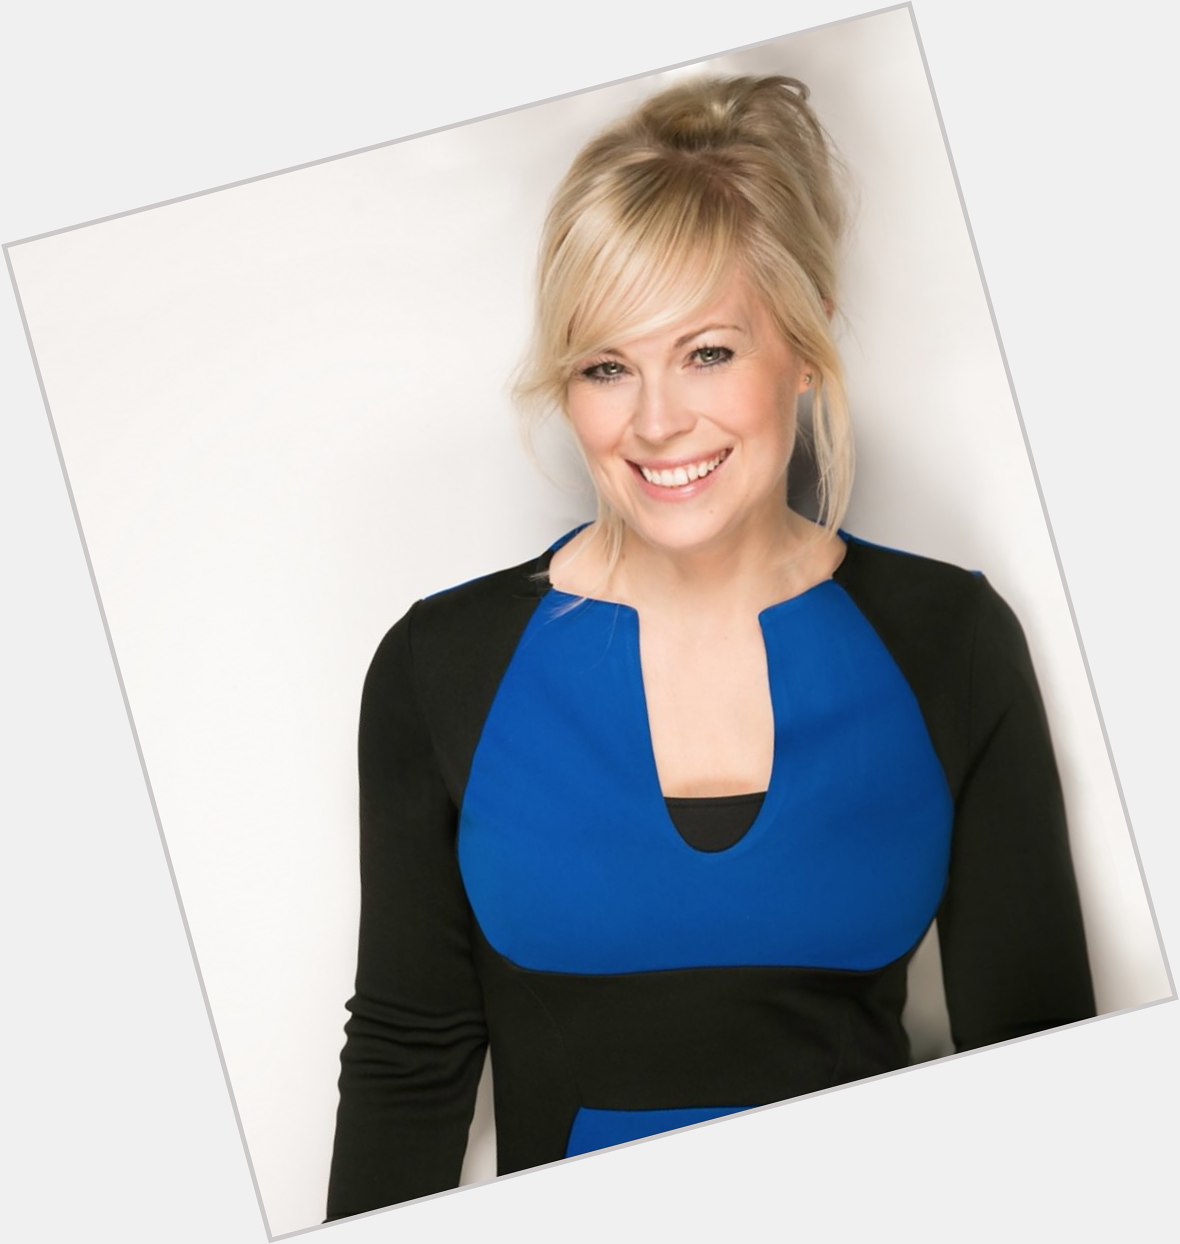 <a href="/hot-women/vicky-beeching/where-dating-news-photos">Vicky Beeching</a> Slim body,  blonde hair & hairstyles